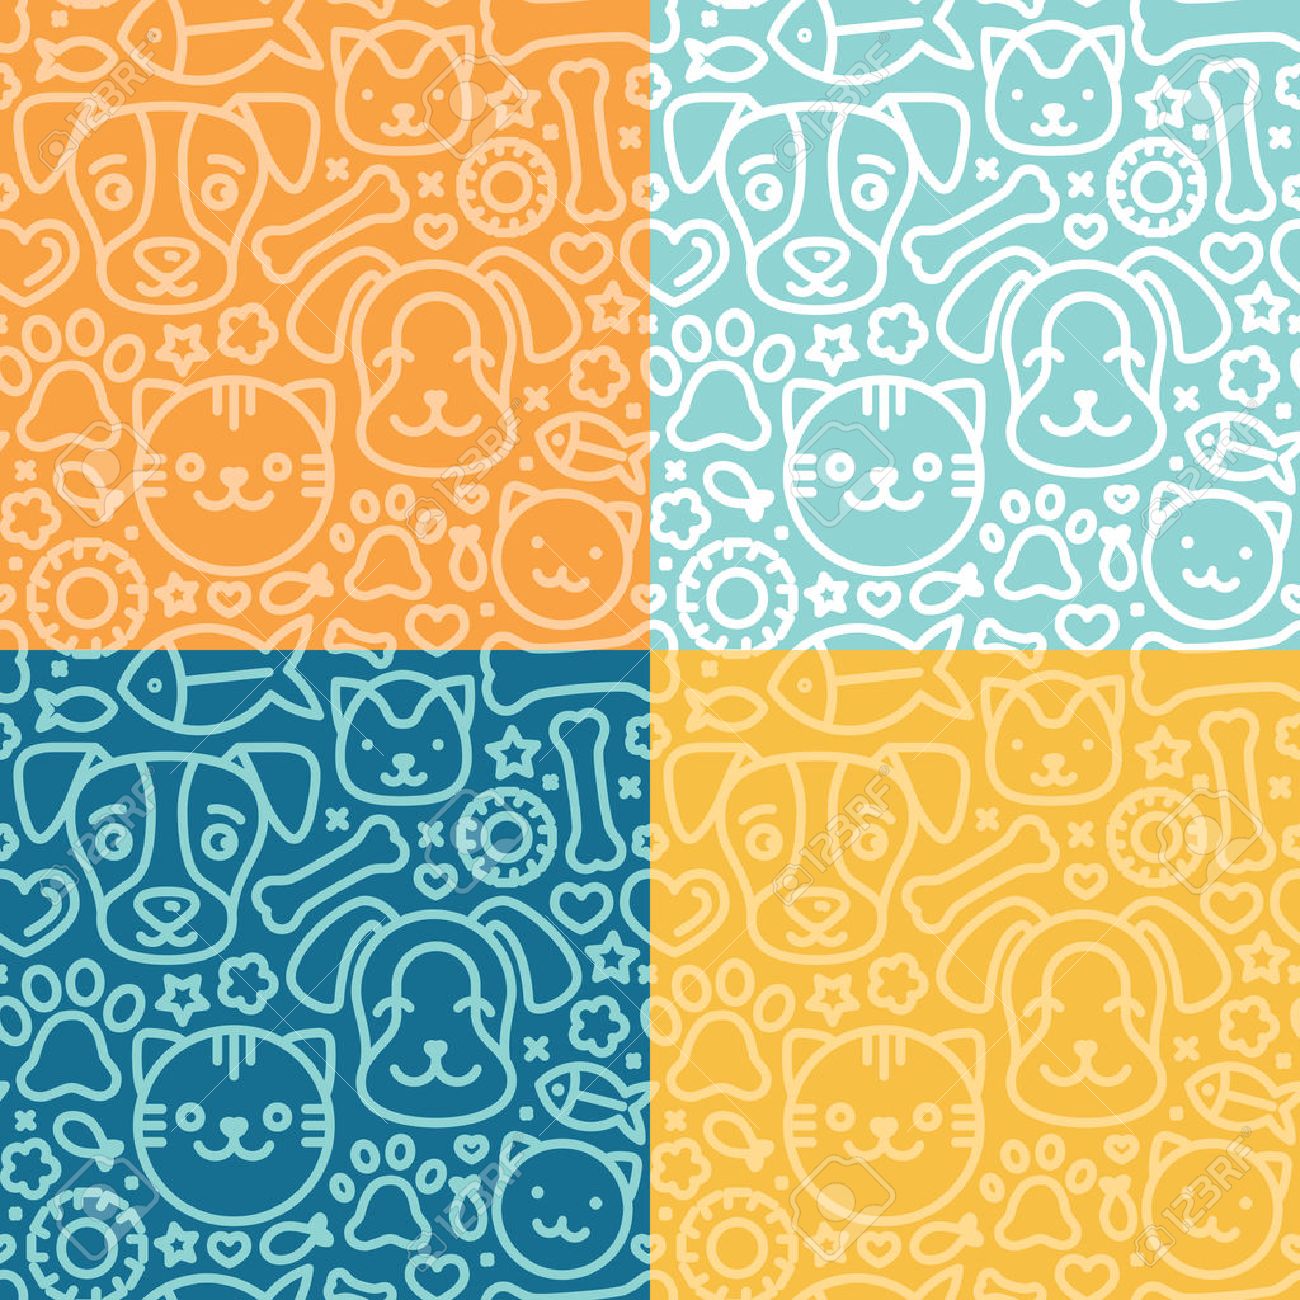 Vector Set Of Seamless Patterns And Background With Trndy Linear